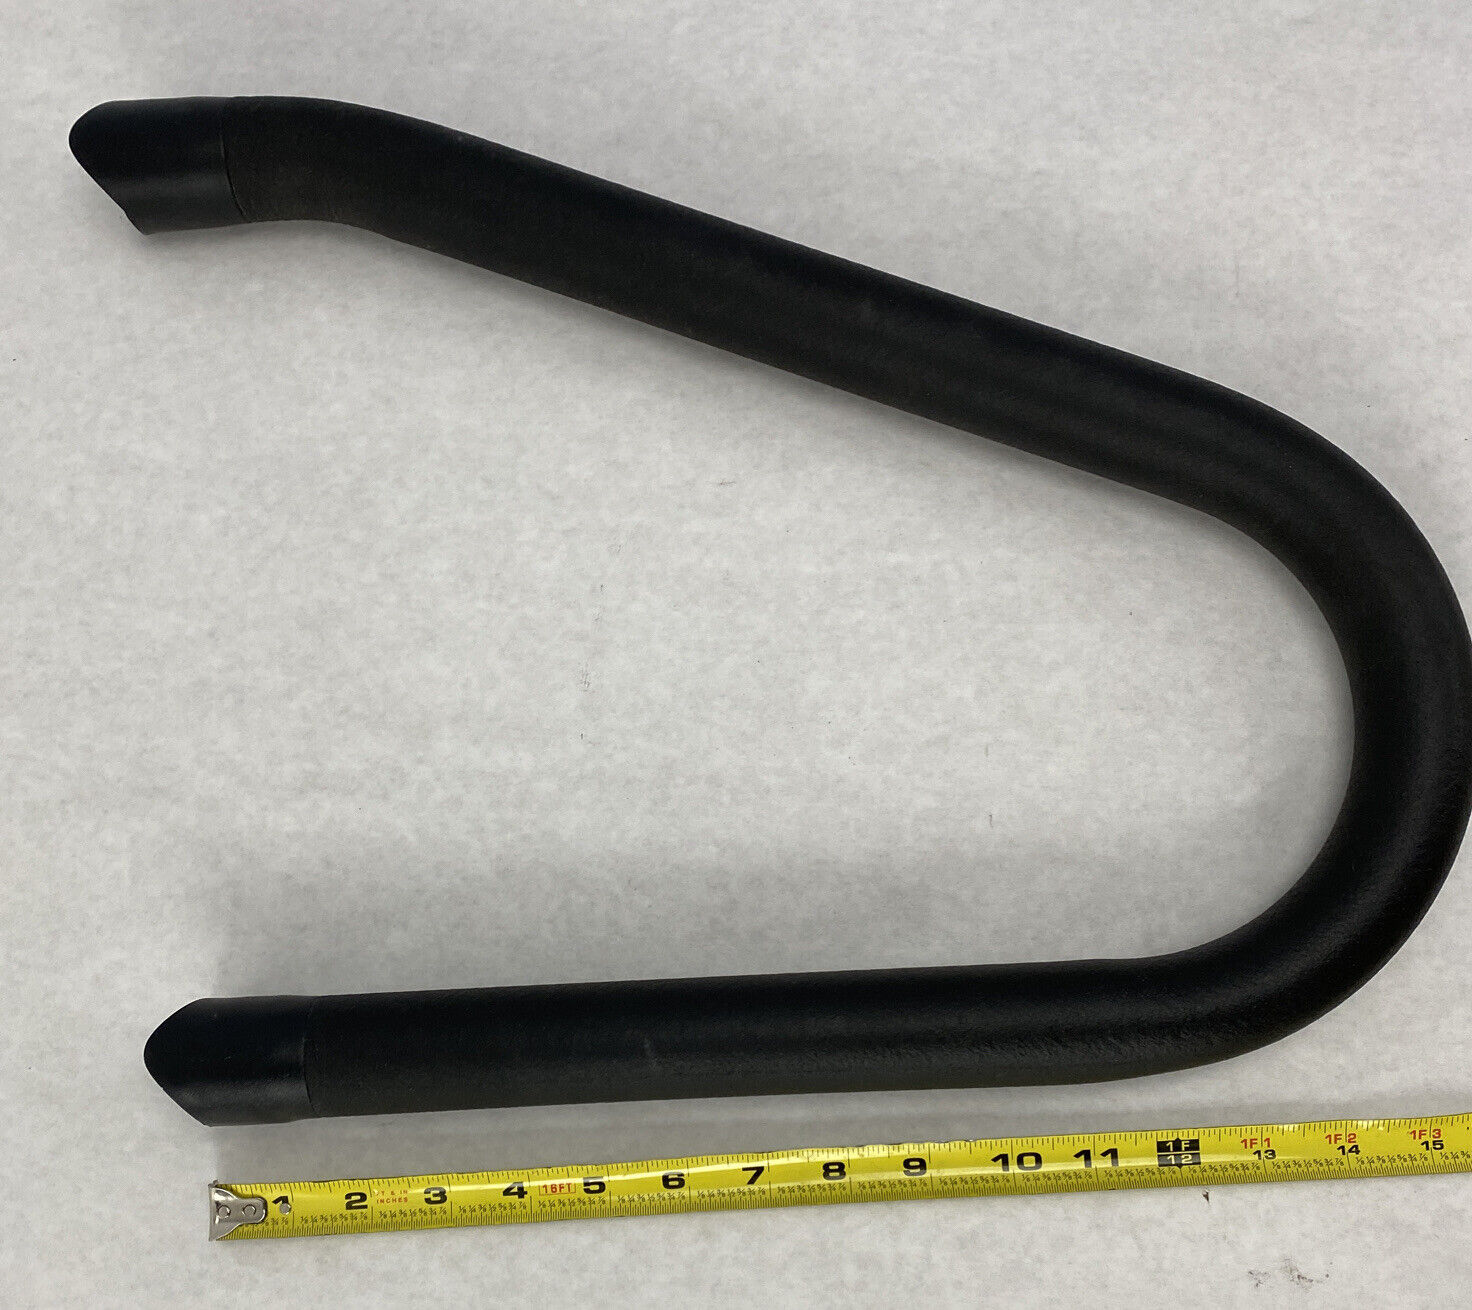 Vision Fitness T9200 Treadmill Curved Side Hand Rails Grip Replacement